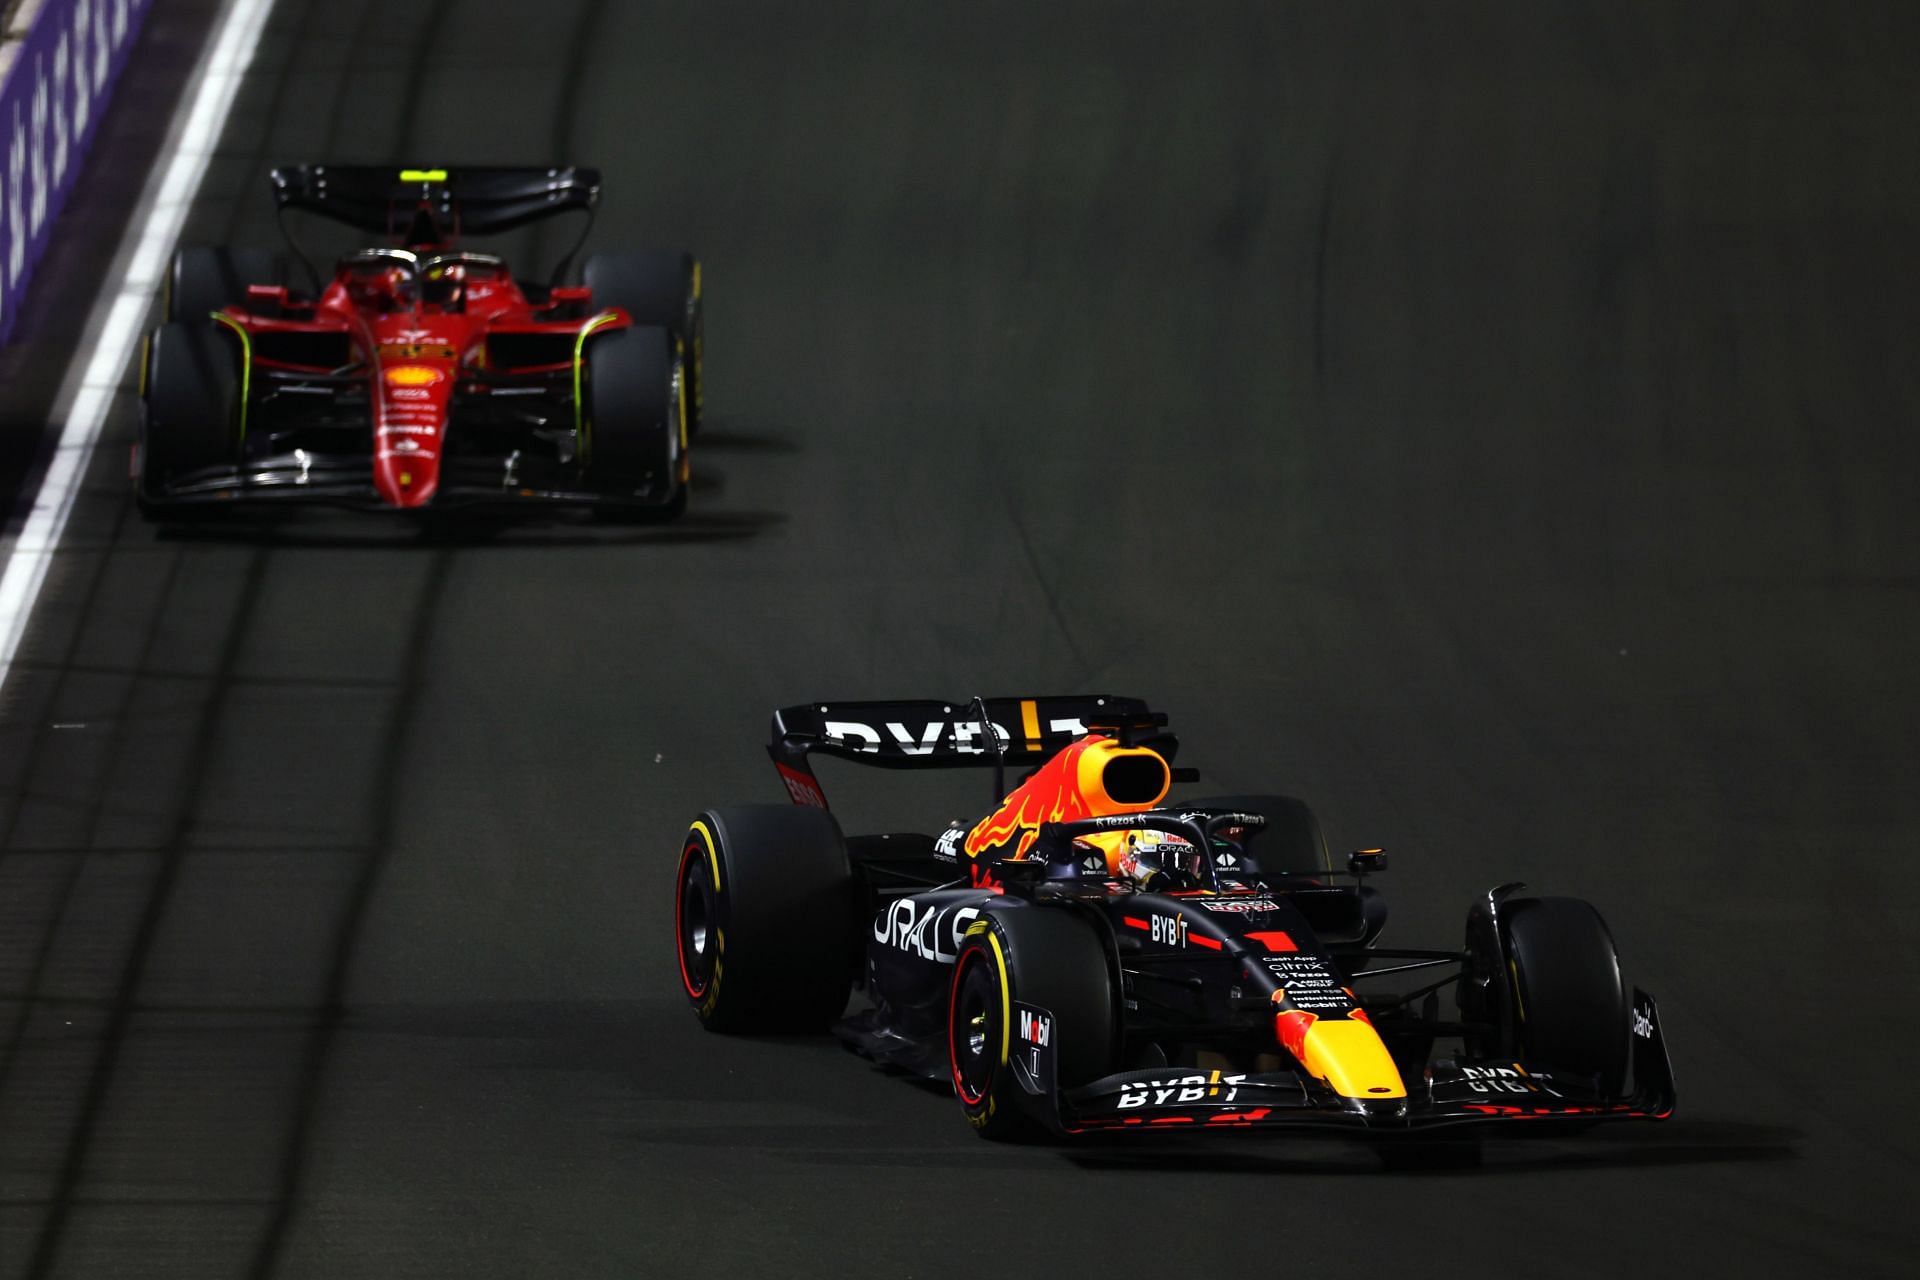 F1 Grand Prix of Saudi Arabia - Max Verstappen and Charles Leclerc engaged in an epic duel